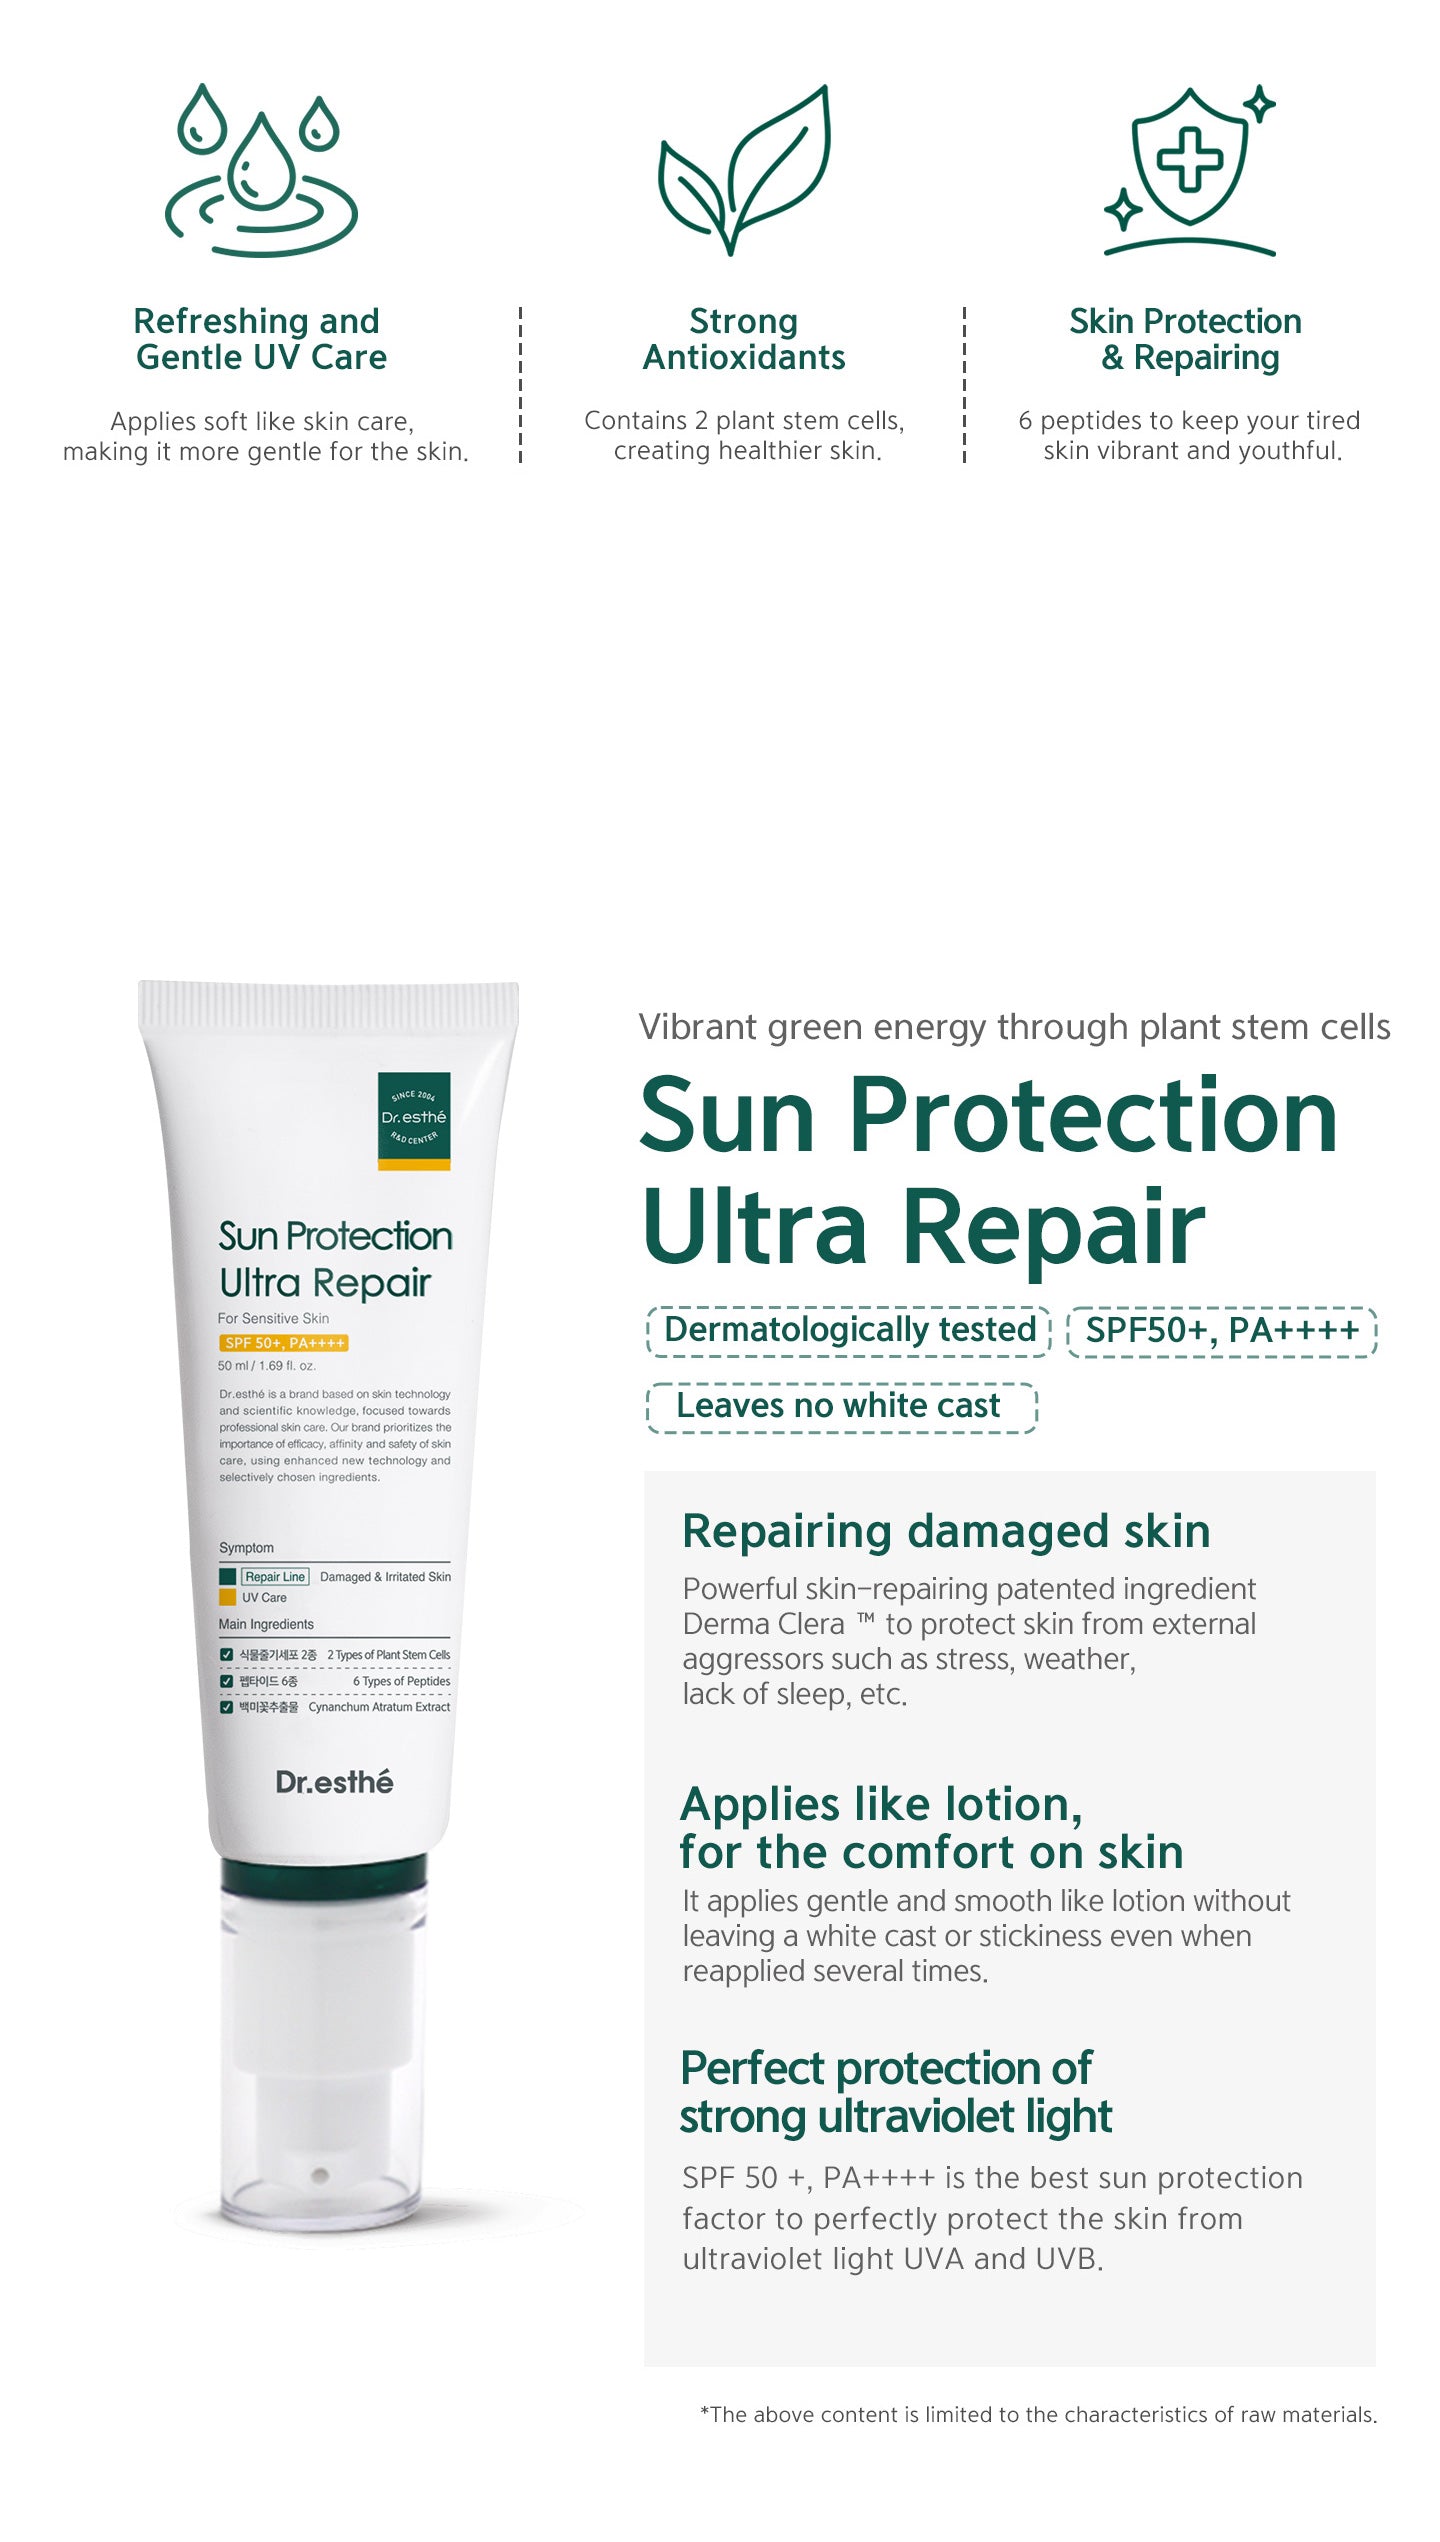 Vibrant green energy through plant stem cells. Repair damaged skin, applies like lotion, for the comfort on skin, perfect protection of strong ultraviolet light, SPF 50+ PA++++ is the best sun protection factor to perfectly protect the skin from ultraviol